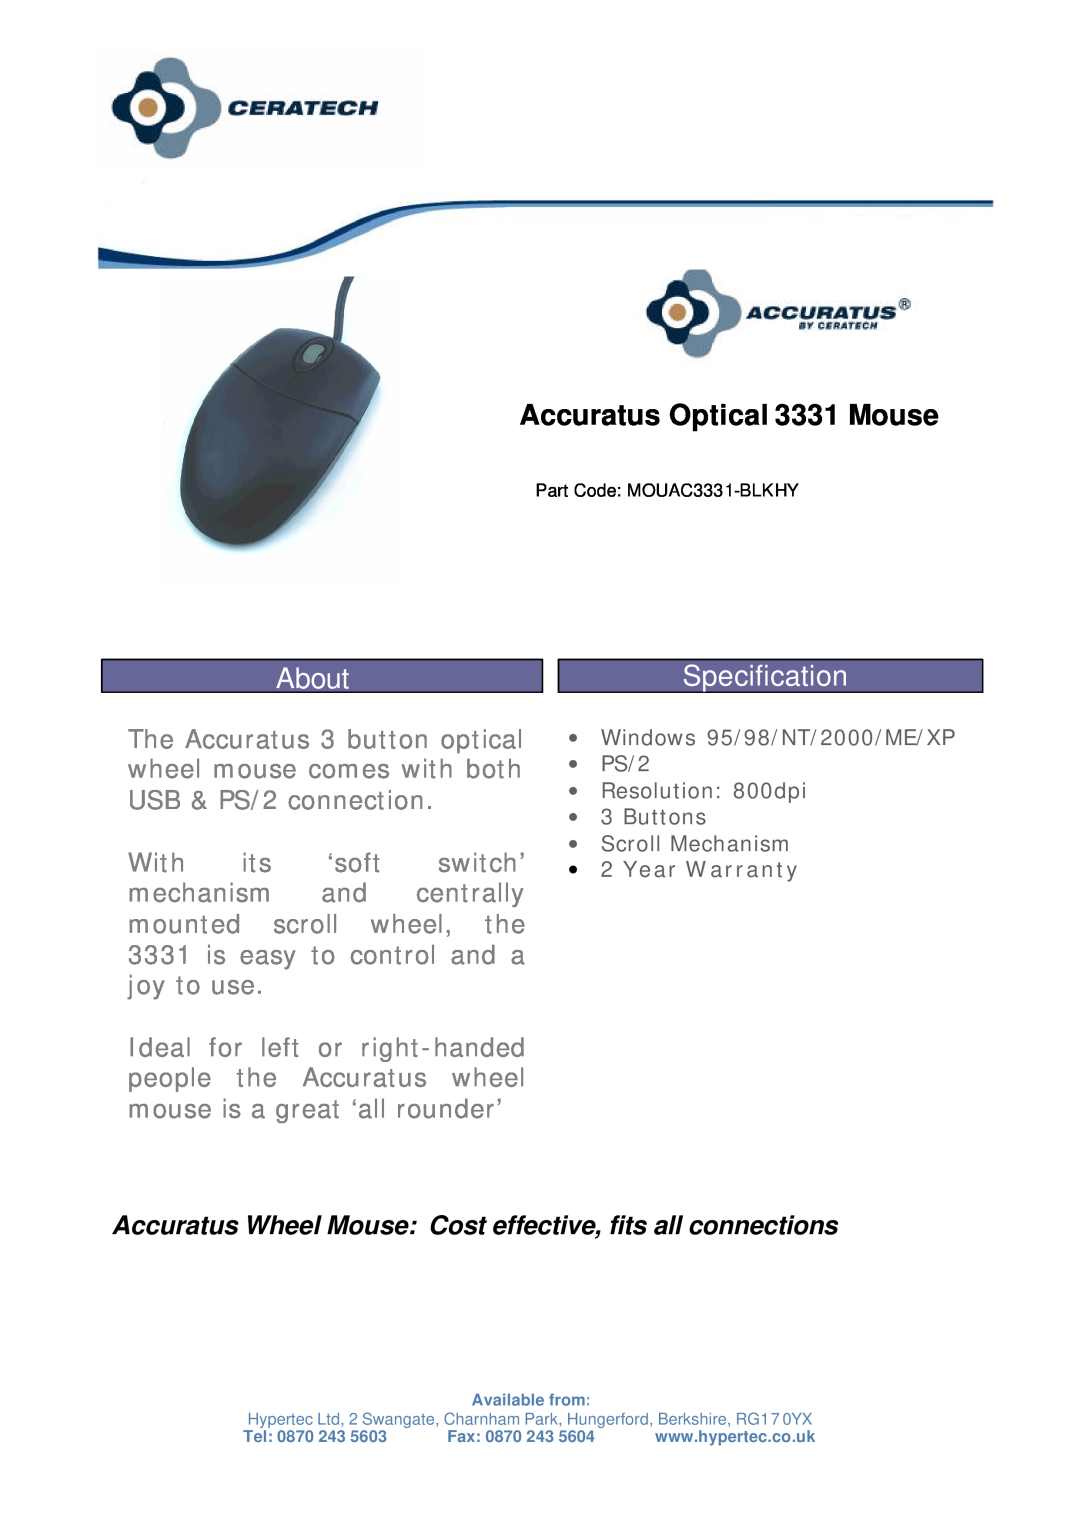 Hypertec warranty Accuratus Optical 3331 Mouse, About, Specification 